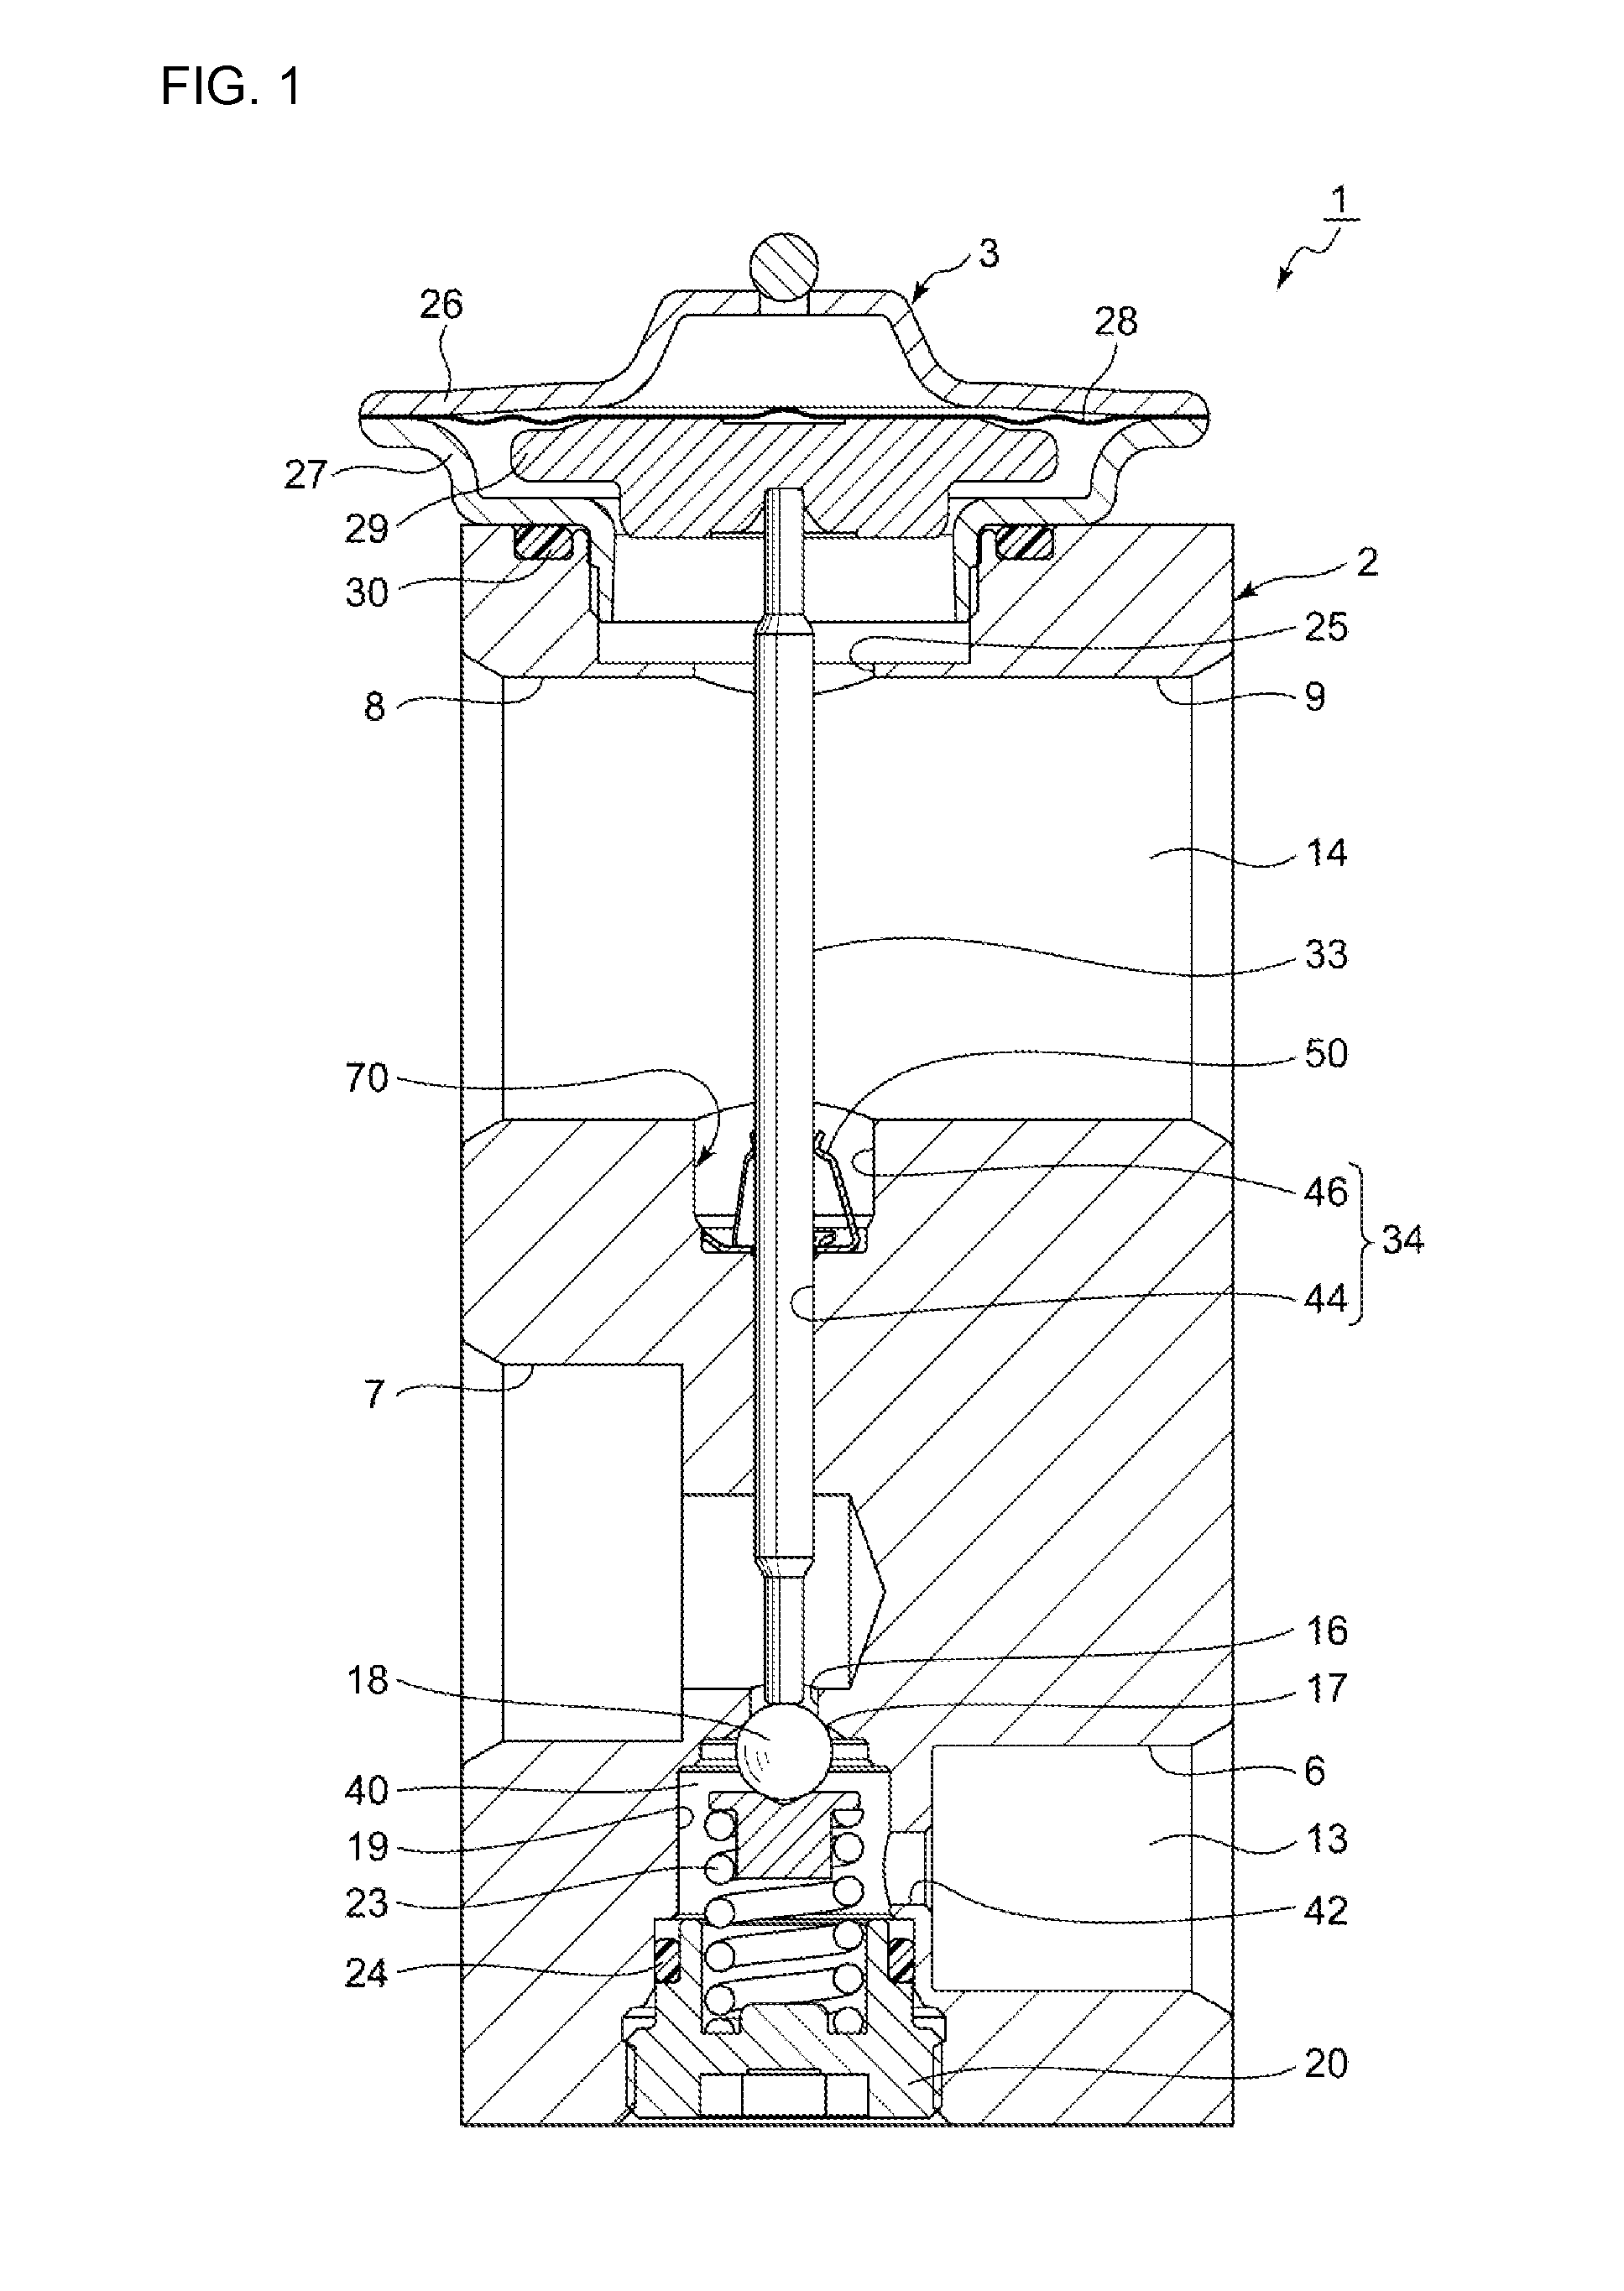 Expansion Valve and Vibration-Proof Spring